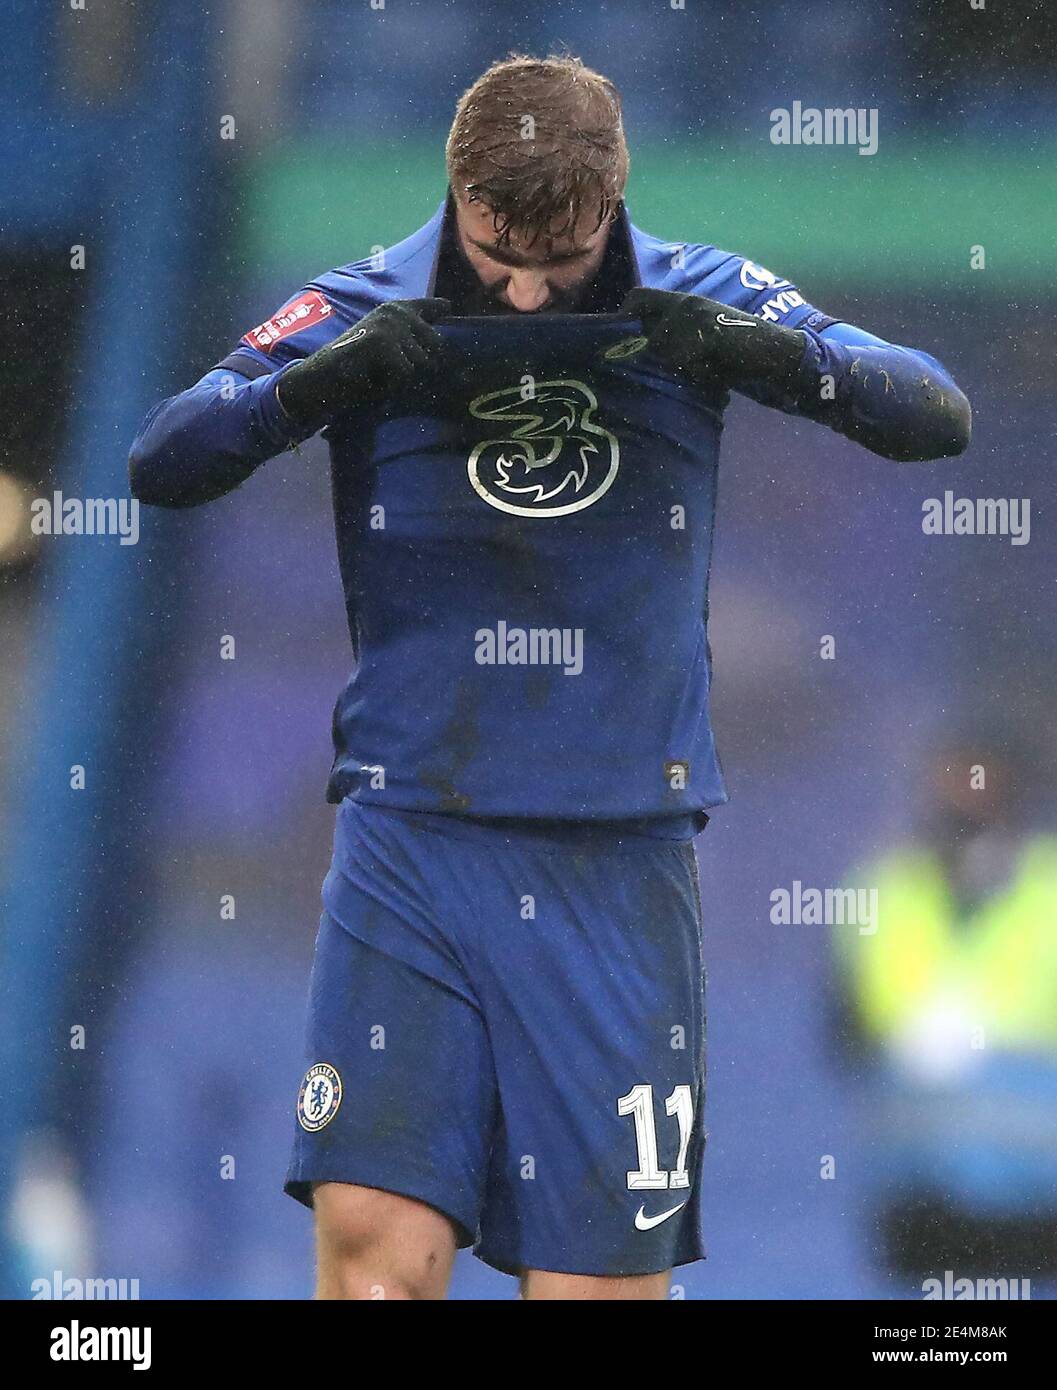 Chelsea's Timo Werner reacts after missing a penalty kick during the Emirates FA Cup fourth round match at Stamford Bridge, London. Picture date: Sunday January 24, 2021. Stock Photo